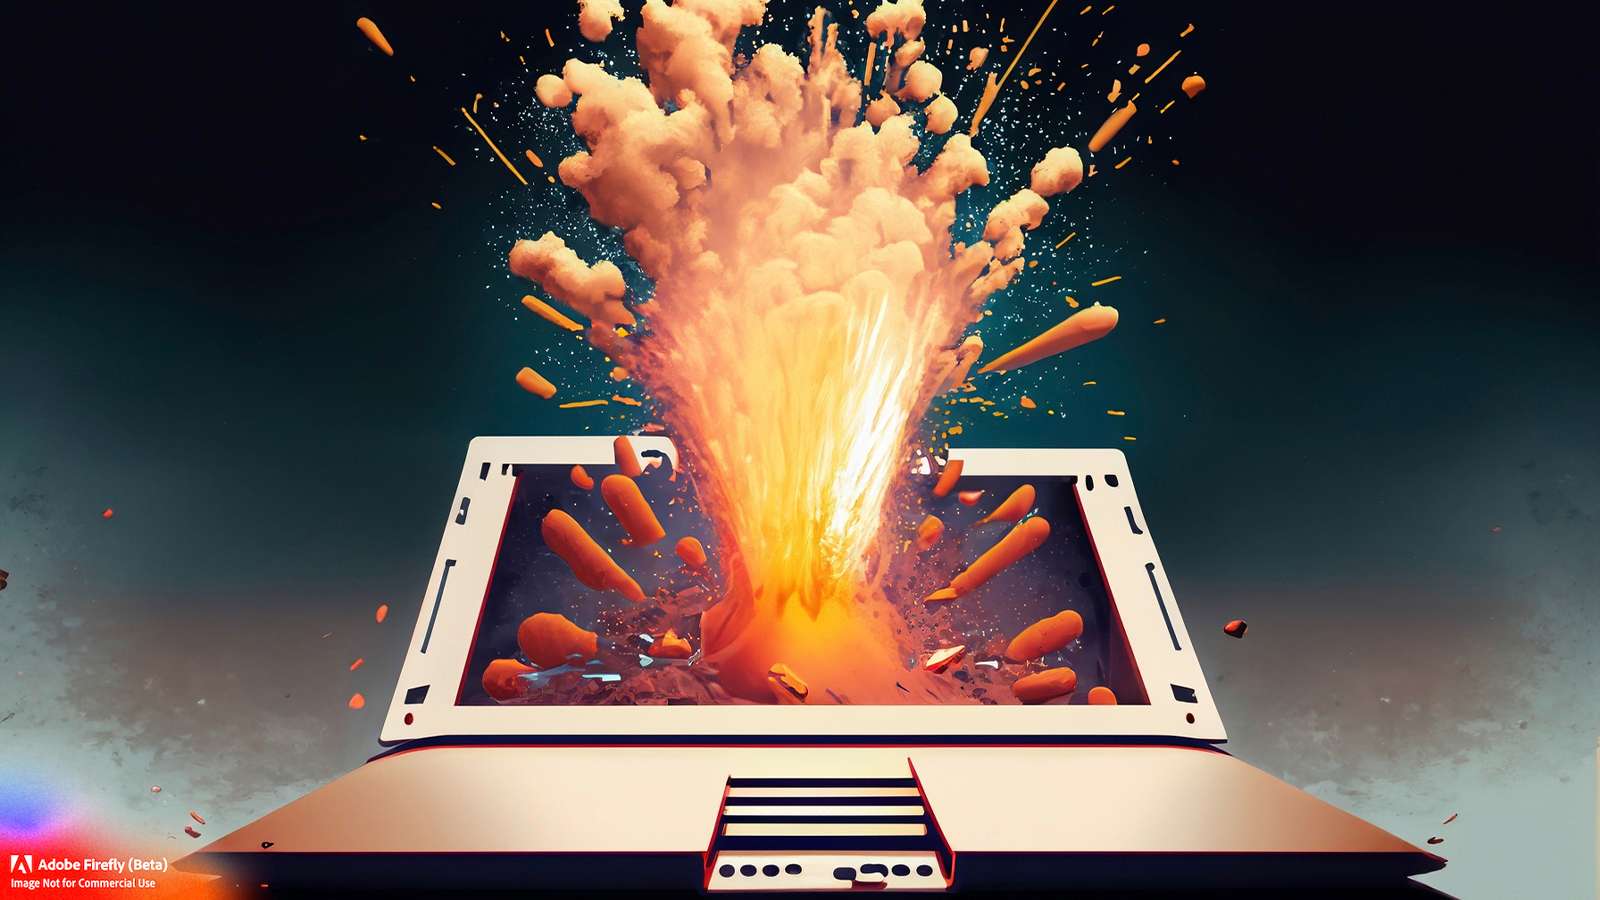 AI image of a computer exploding